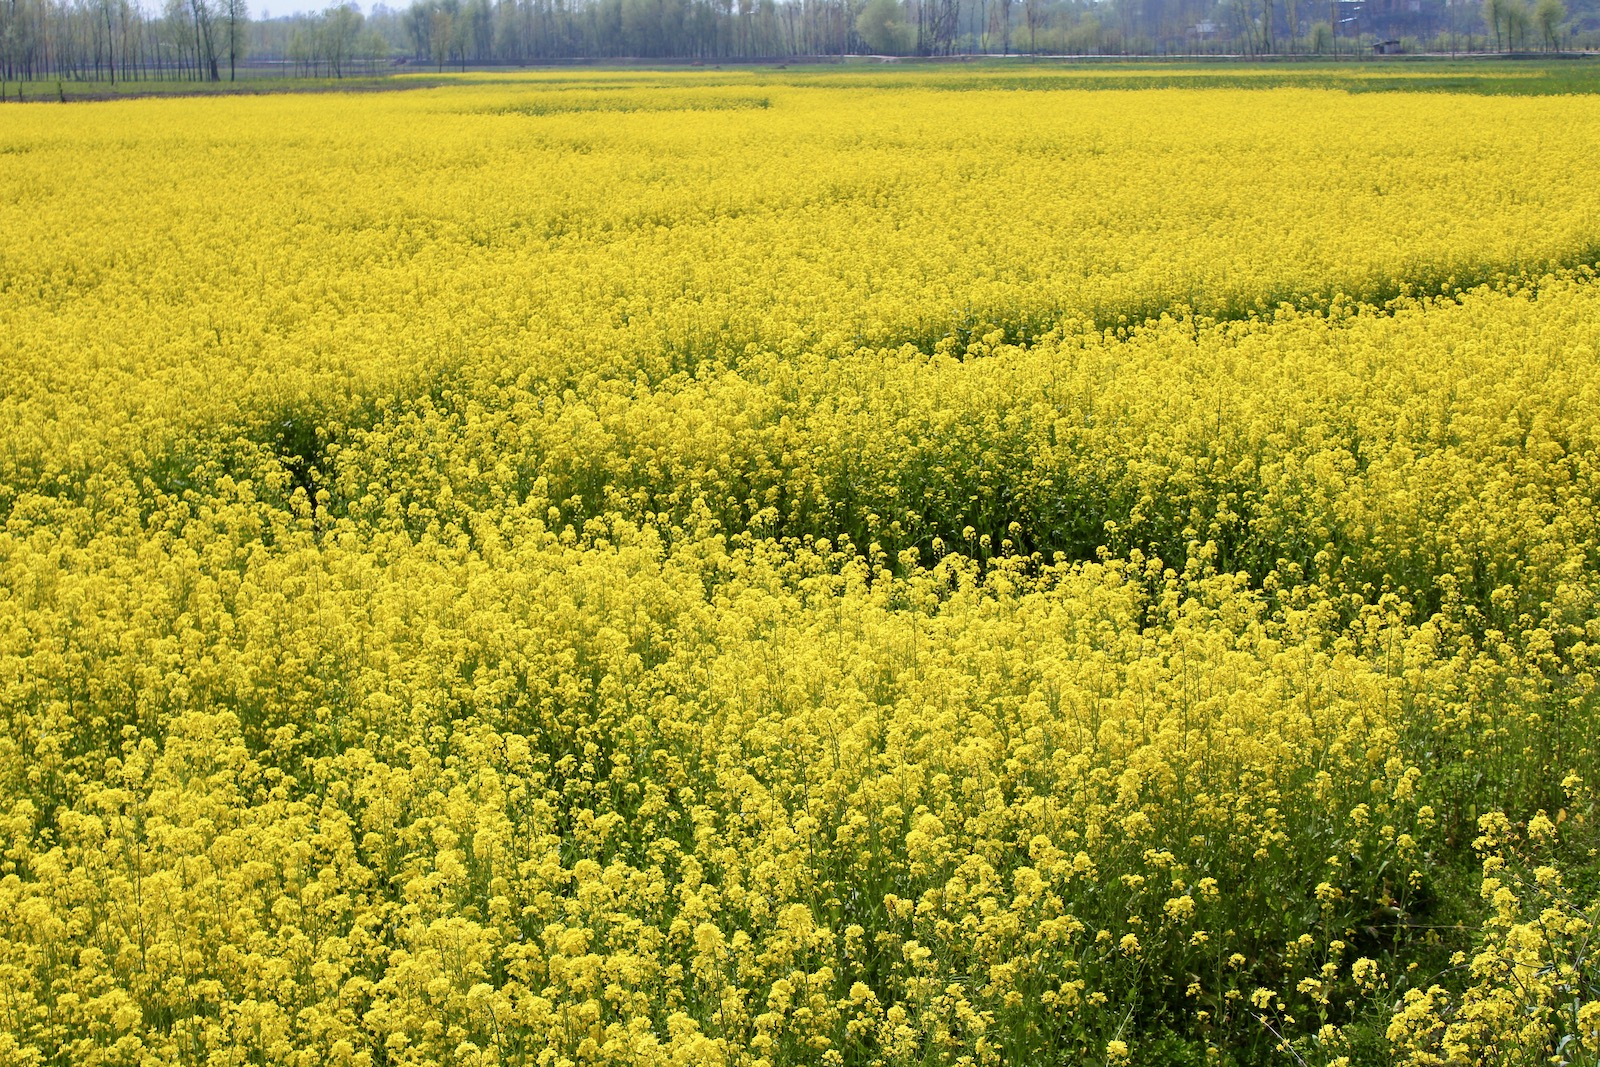 Bright yellow mustard fields in bloom during spring time in the Kashmir Valley, India